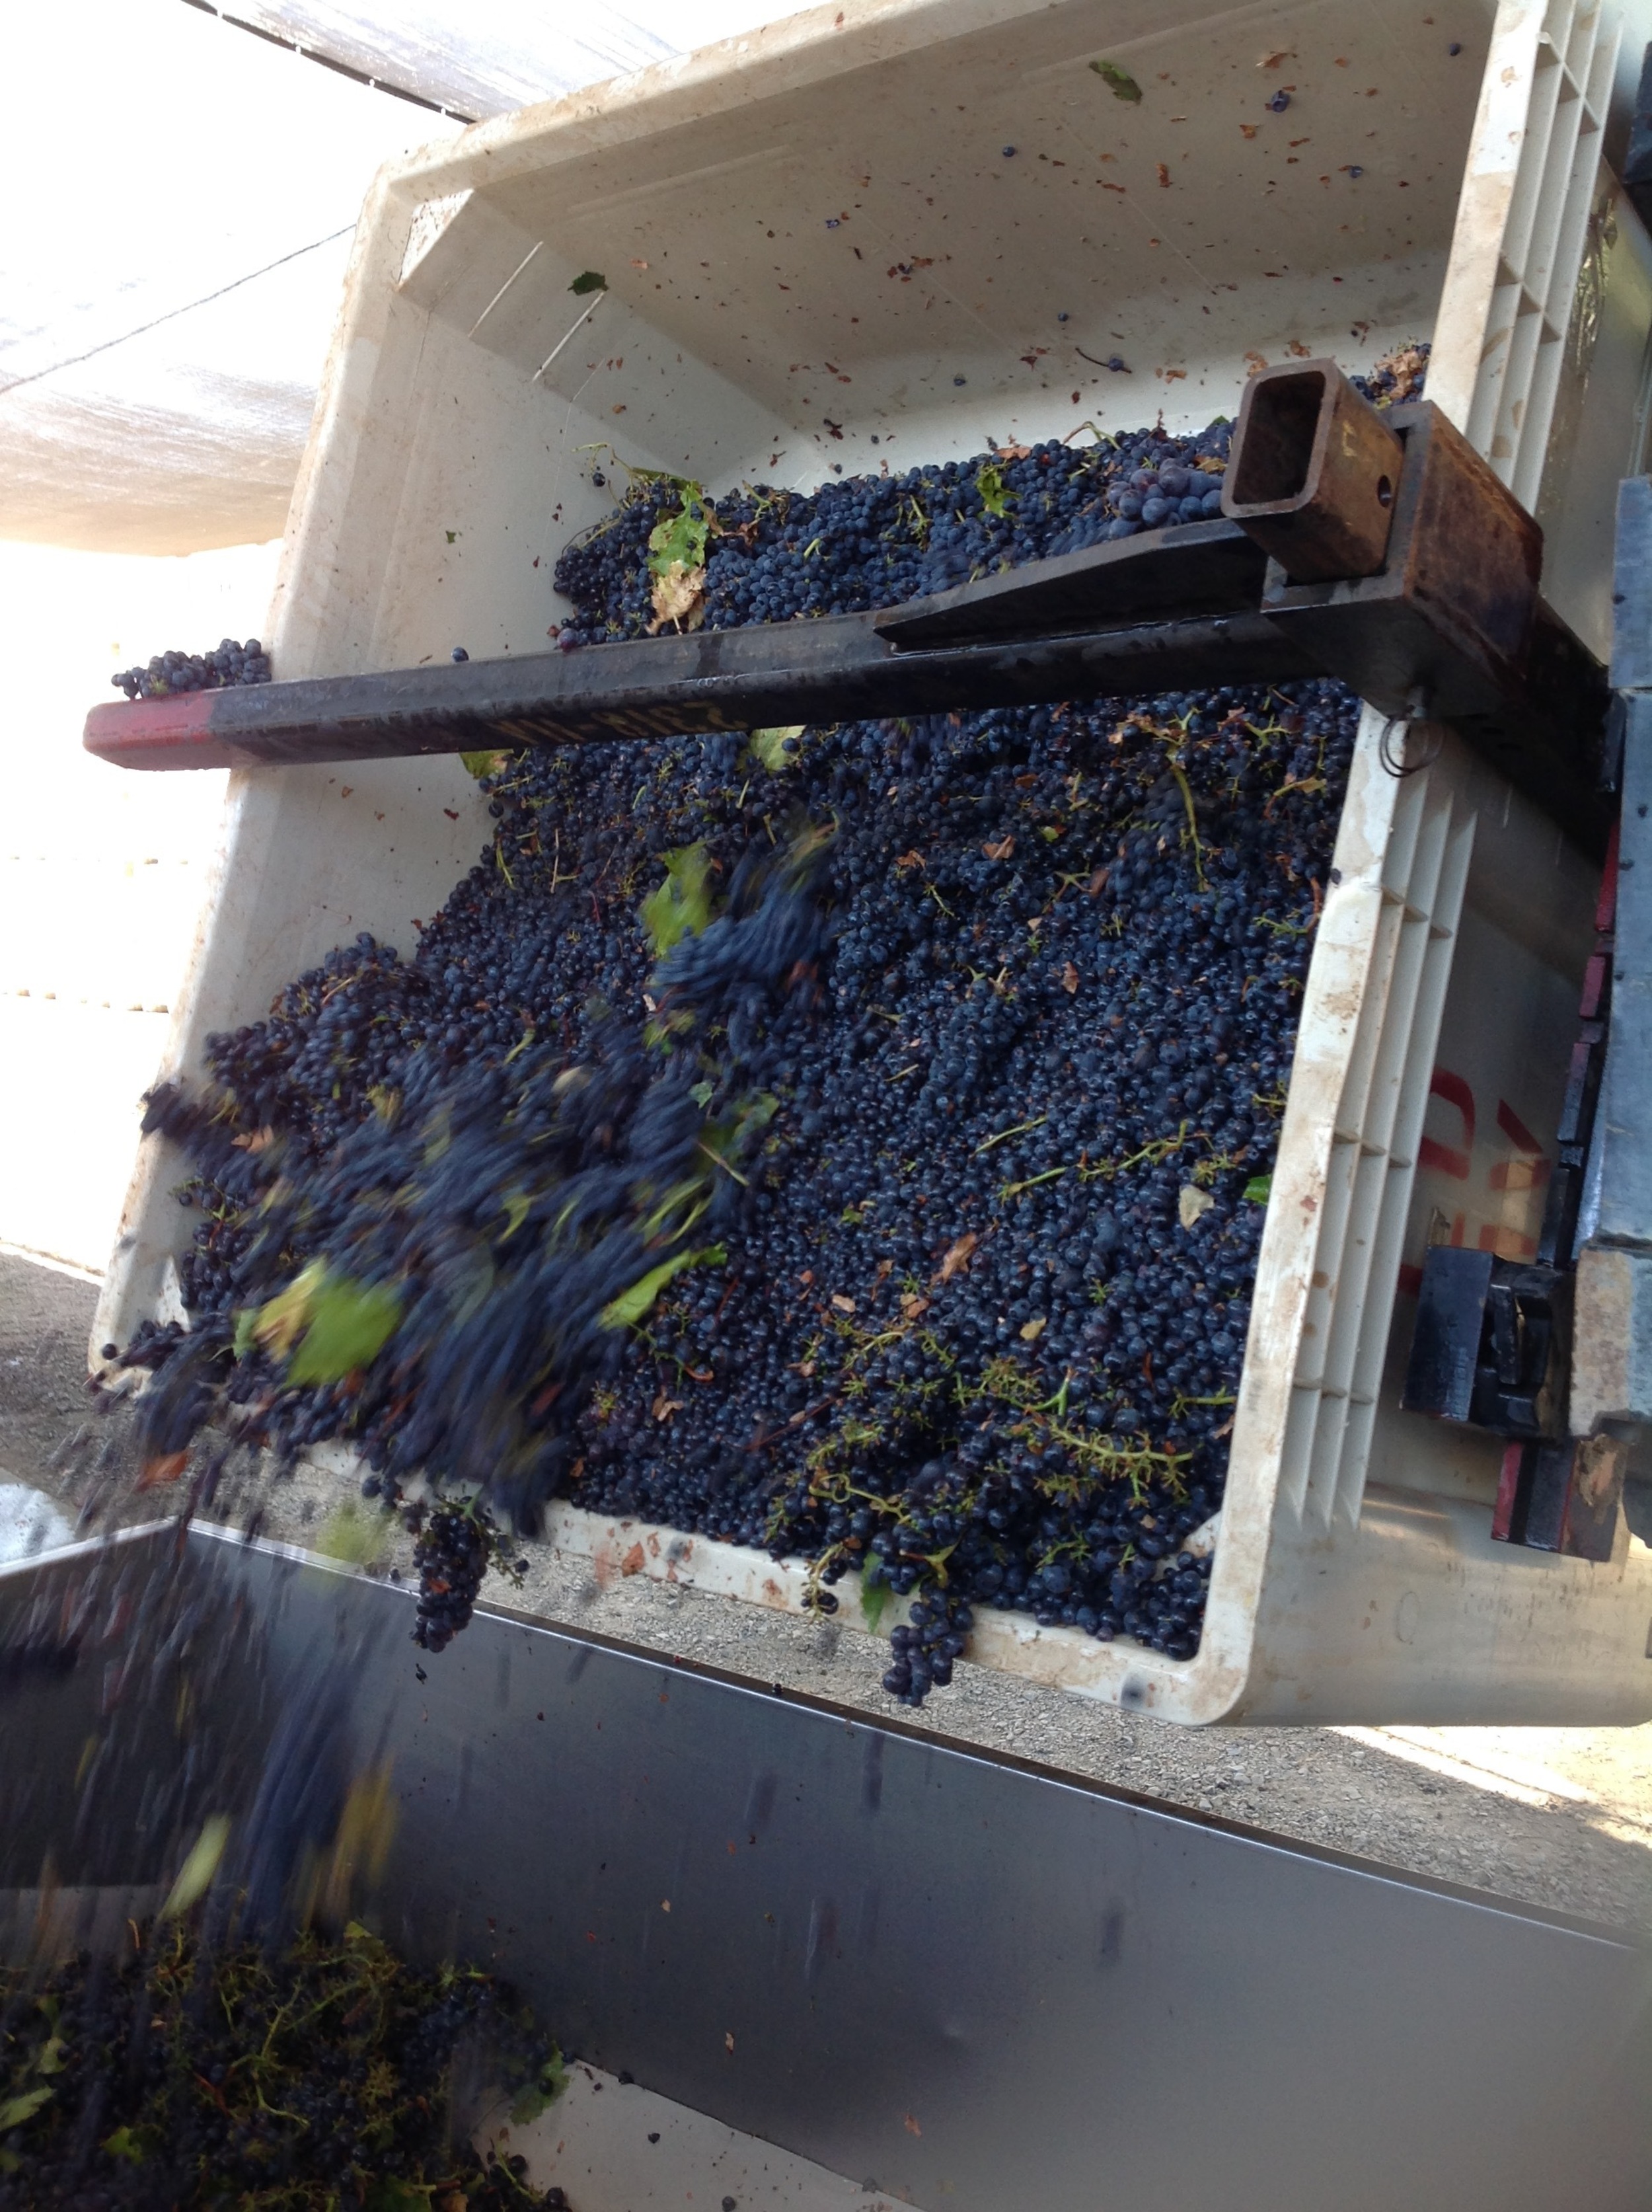 Dumping 1000 pounds of grapes